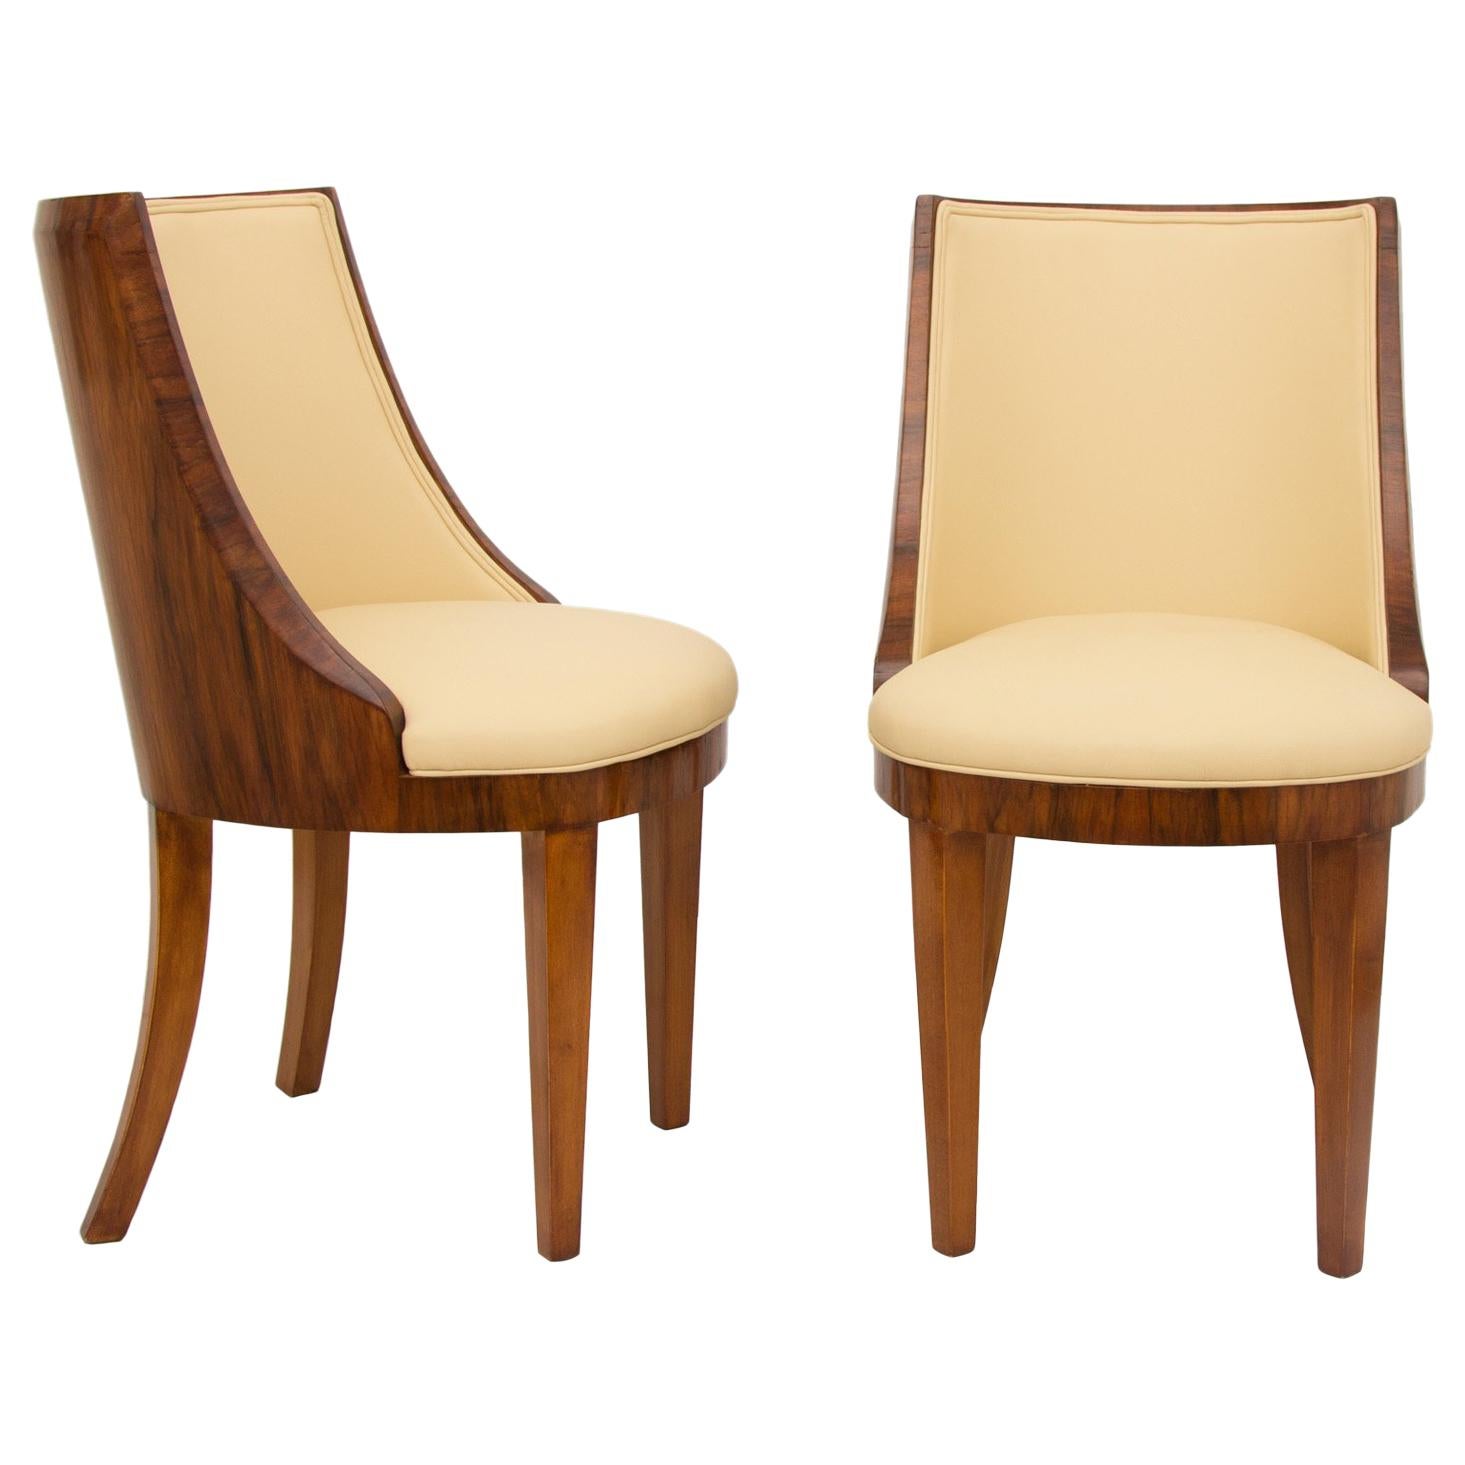 Pair of Art Deco Chairs by Hille